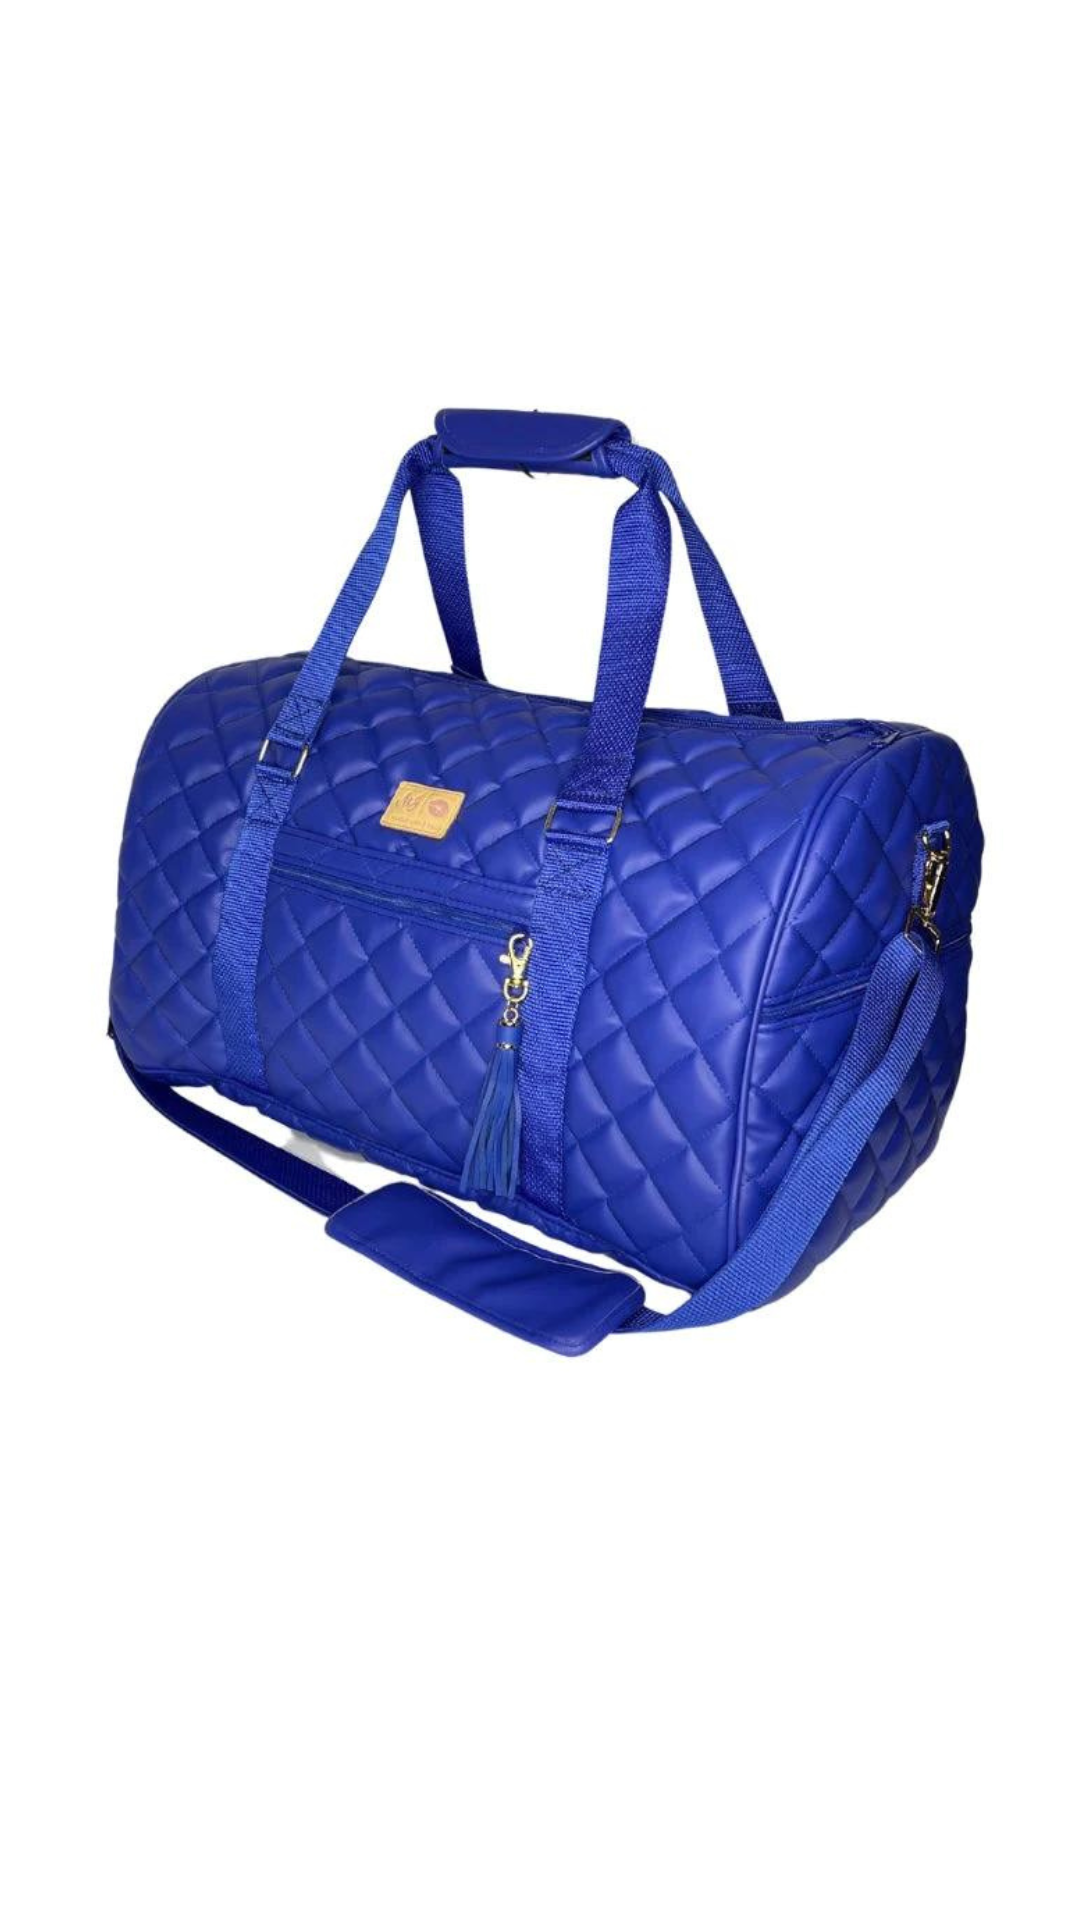 Live Takeover: Quilted Cobalt Duffel by Makeup Junkie (Ships in 4-5 weeks)